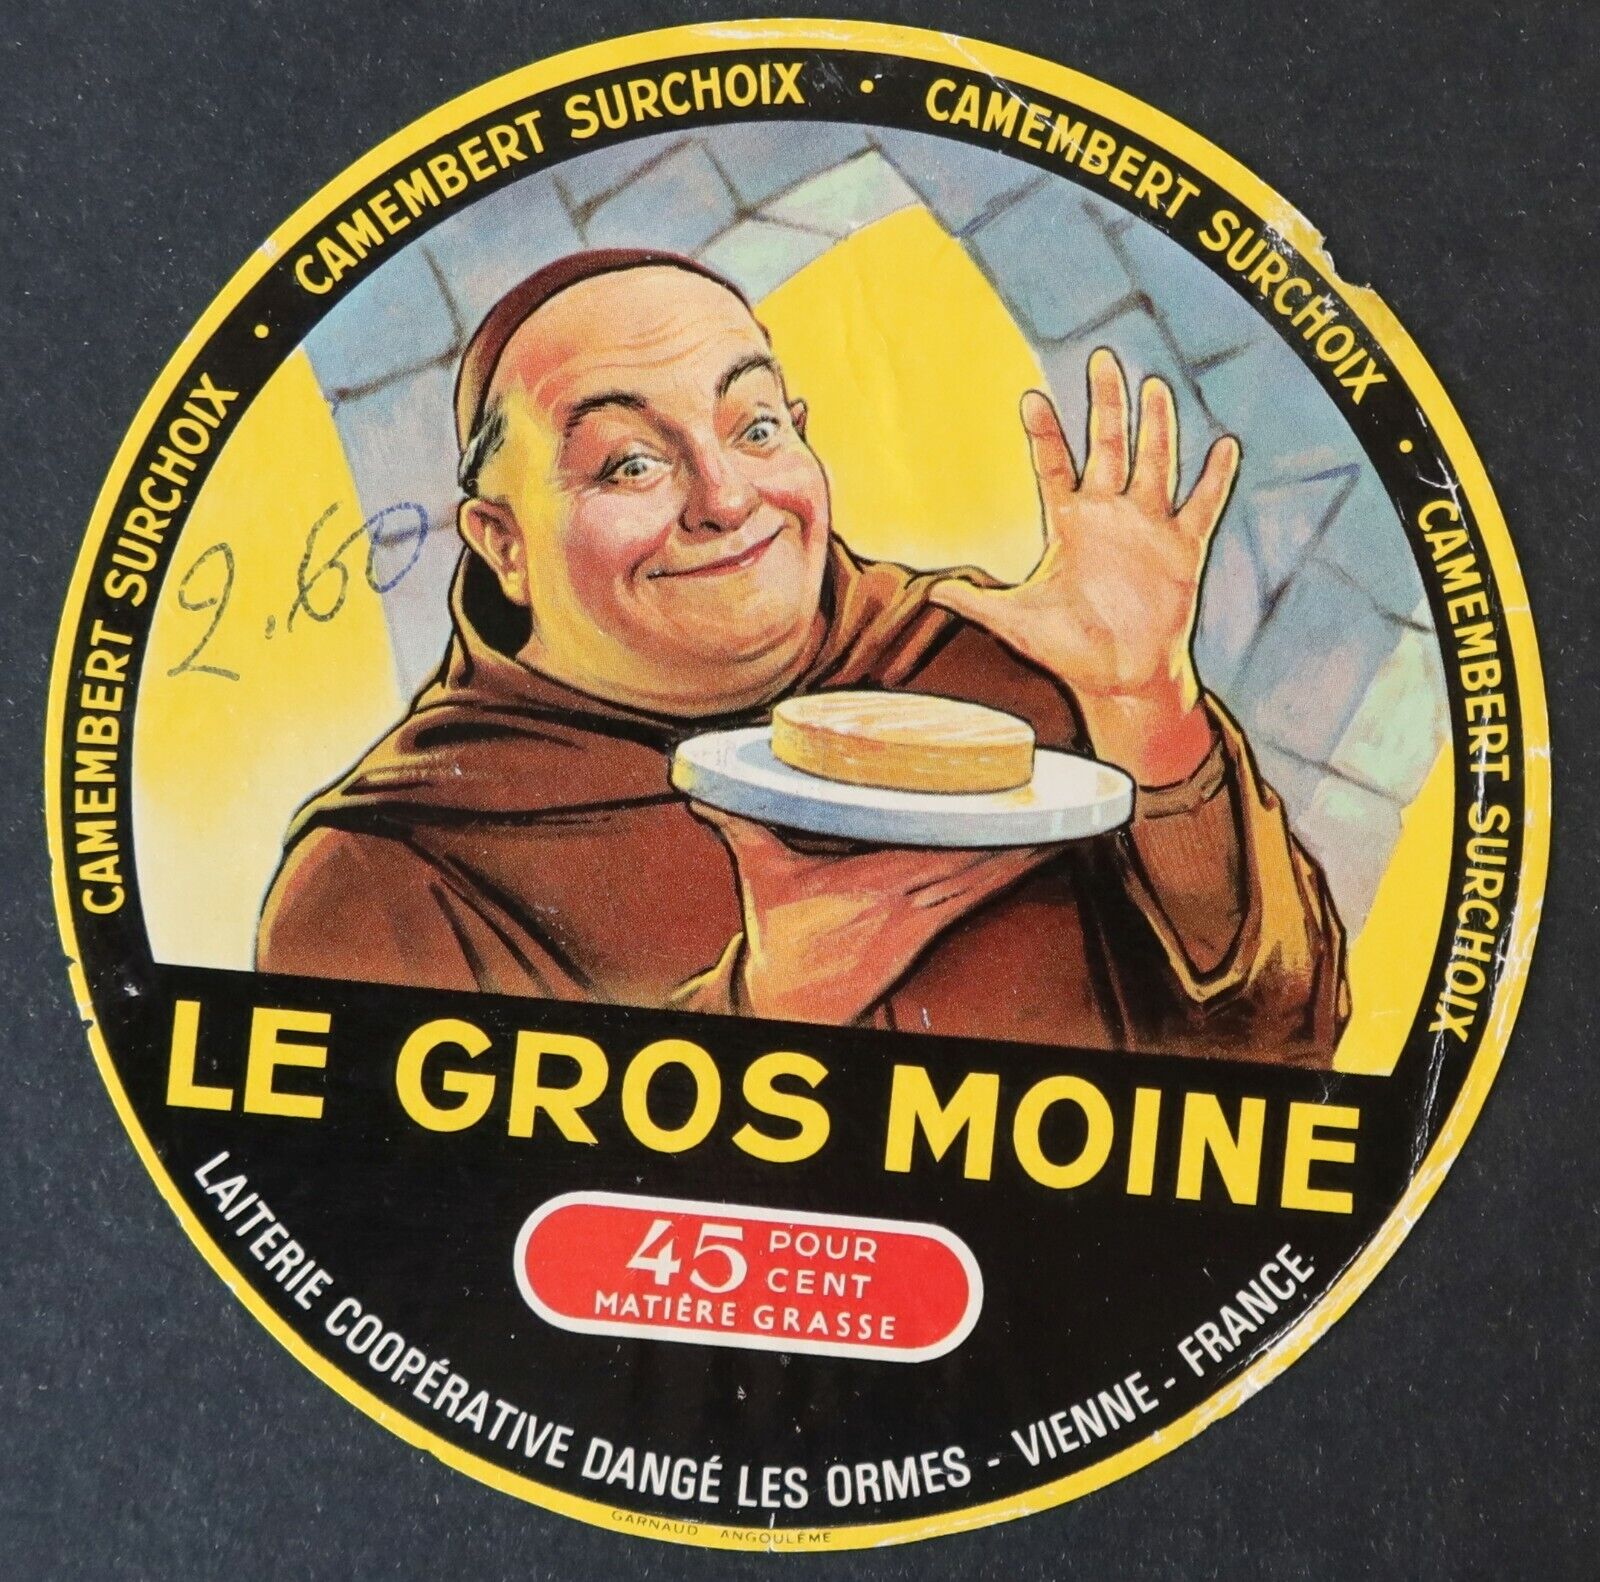 CAMEMBERT LE GROS MONINE Vienna Poitou cheese label 36 cheese label